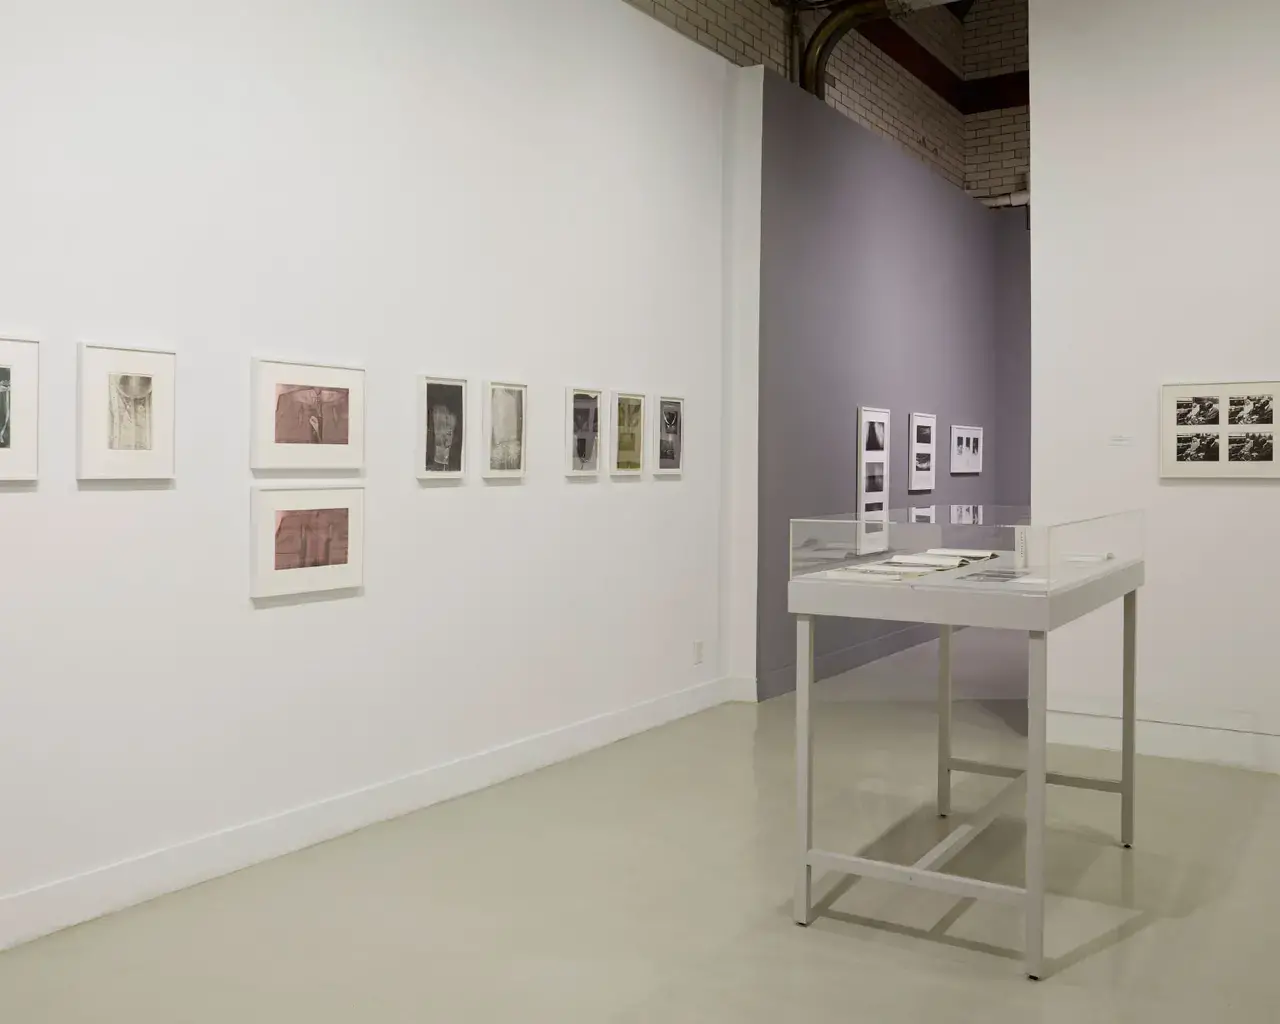 Installation view of Pati Hill: Photocopier, Arcadia University Art Gallery. Left: Photocopied Garments, 1976, 9 examples from the series of black &amp; white copier prints. Photo by Aaron Igler, Greenhouse Media, courtesy of the estate of Pati Hill.